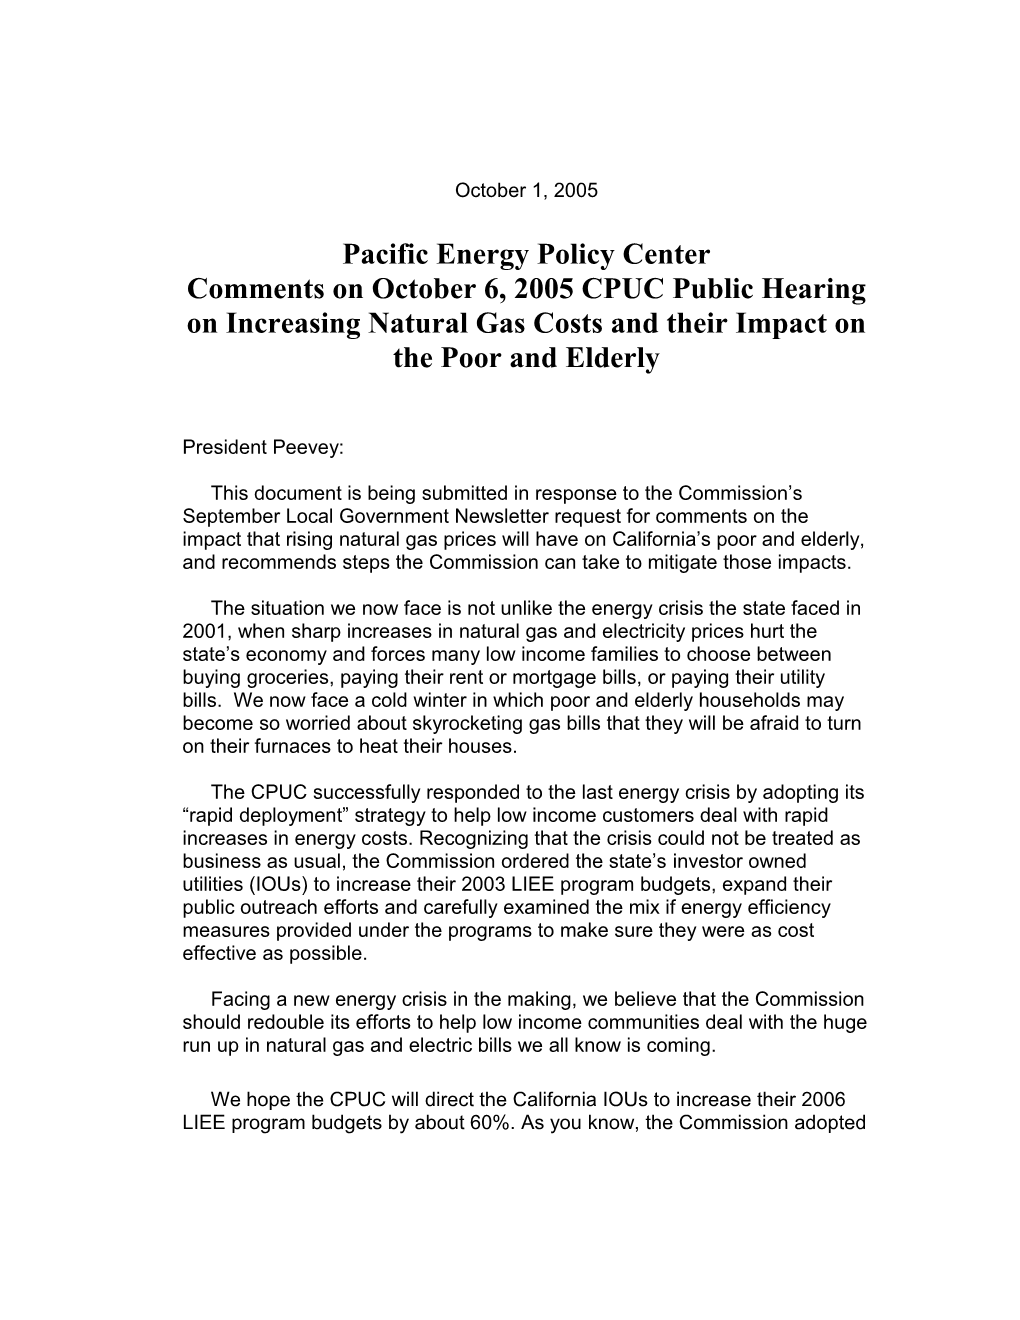 Comments on October 6, 2005 CPUC Public Hearing on Increasing Natural Gas Costs and Their